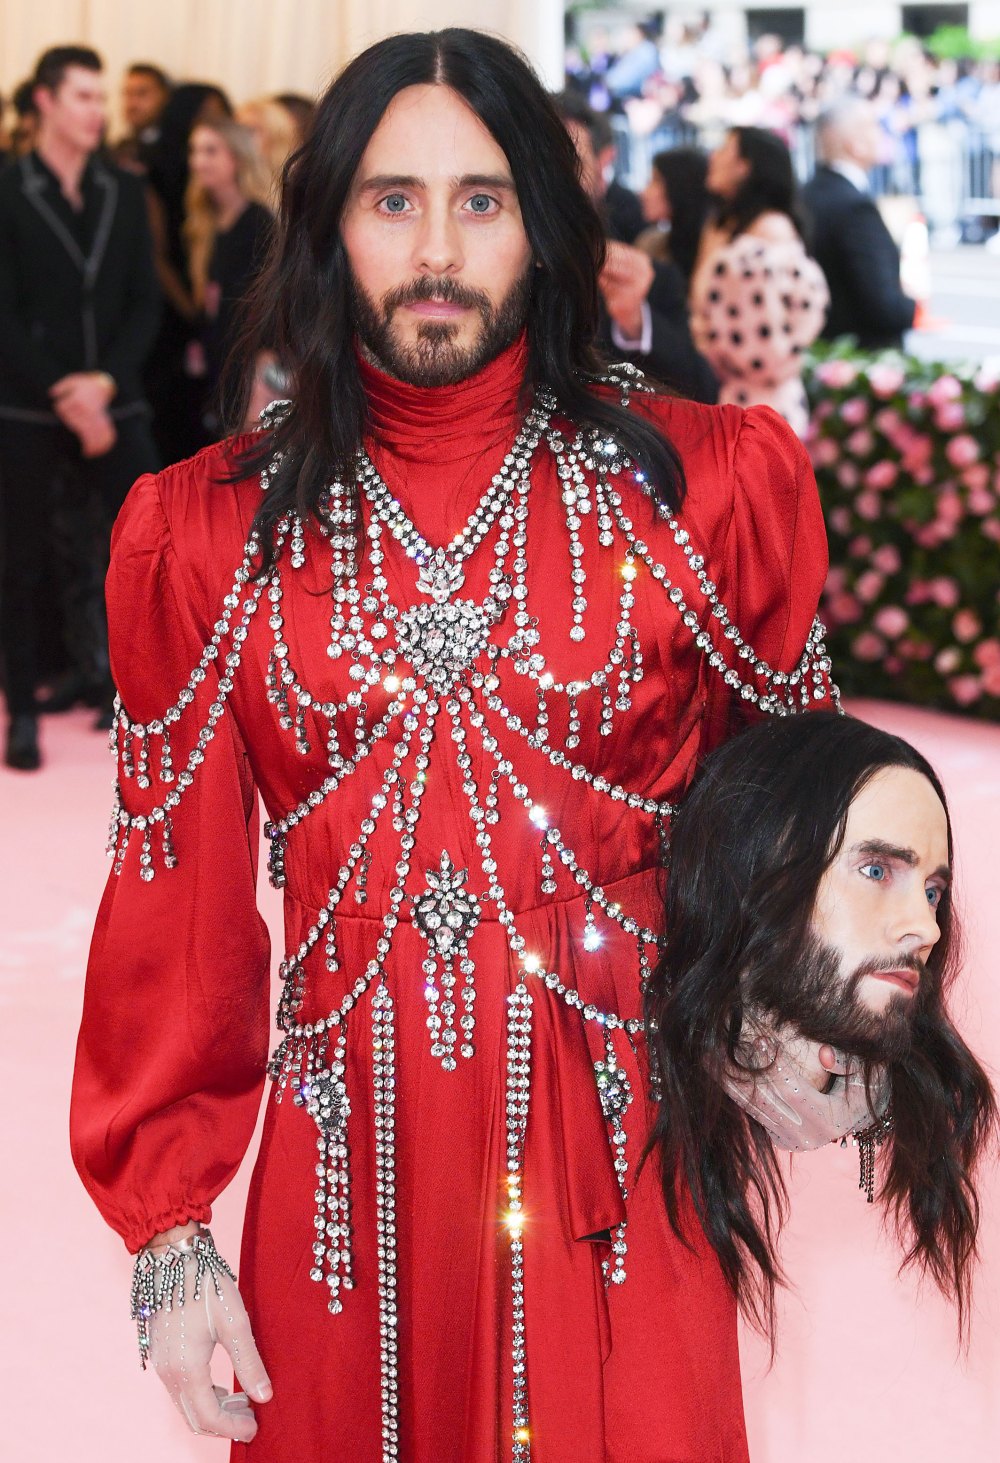 Jared Leto Lost His 2019 Met Gala Gucci Head Purse: Details